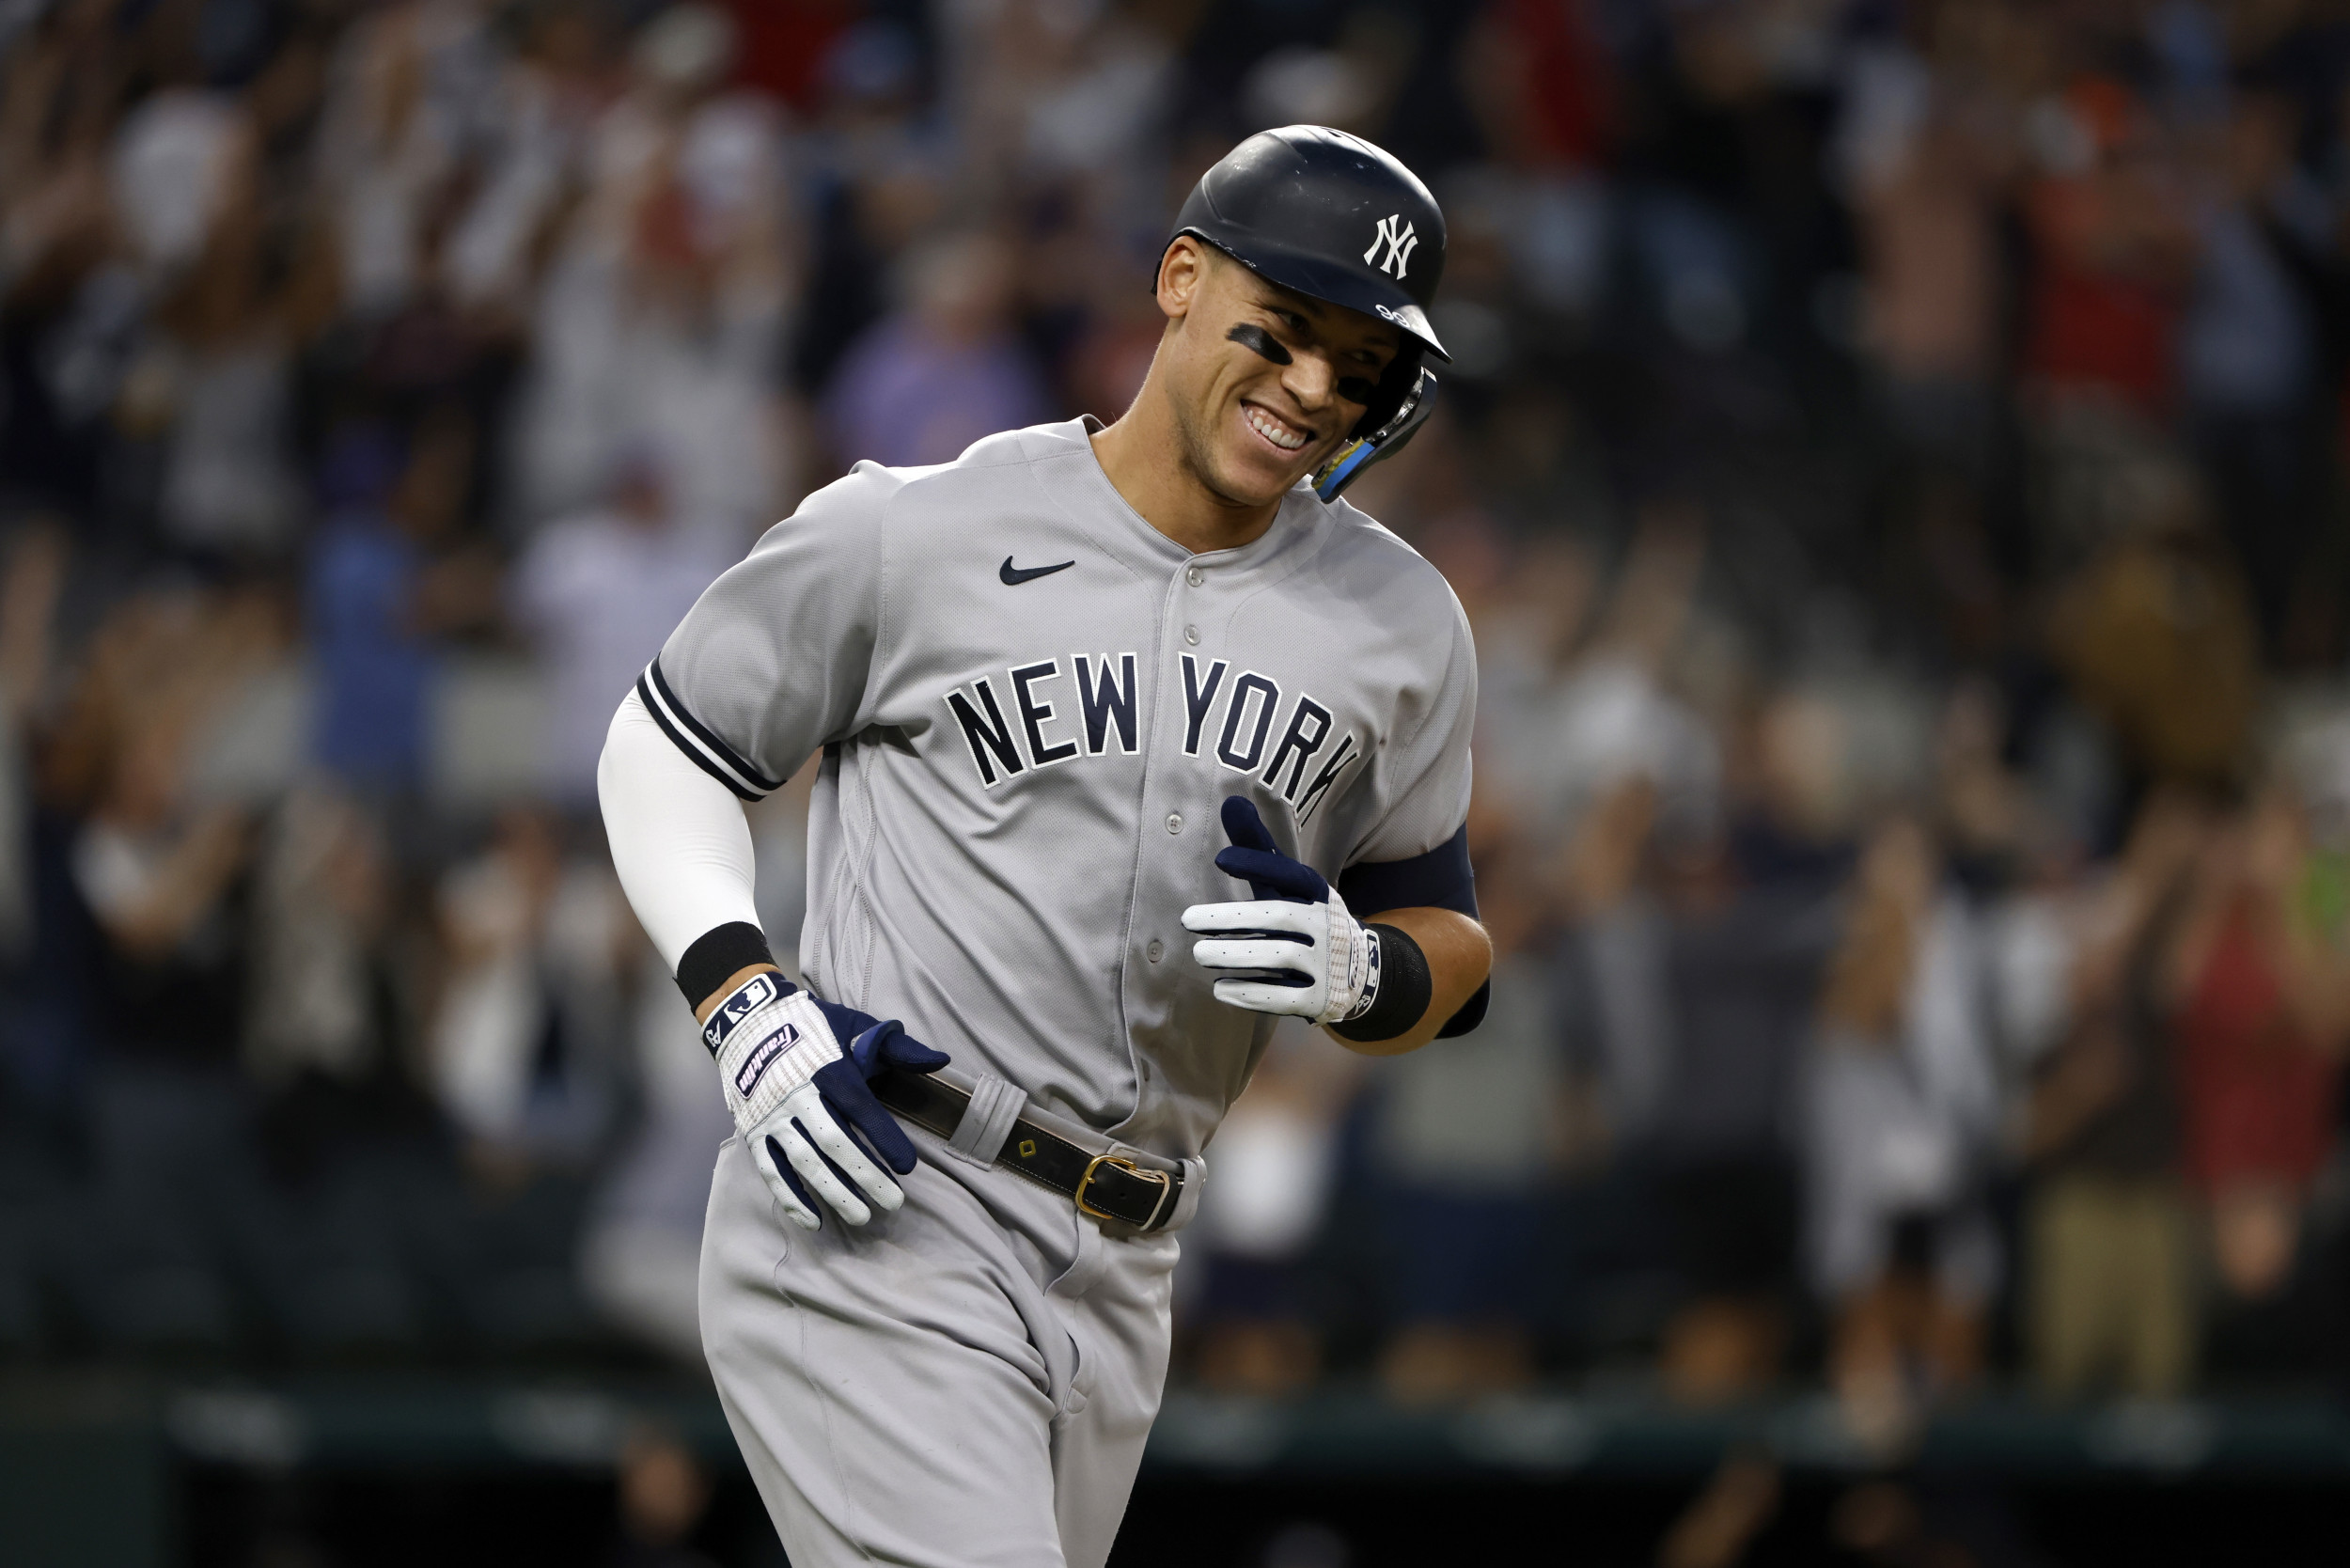 Will The Yankees Sign Aaron Judge To A New Contract Extension?